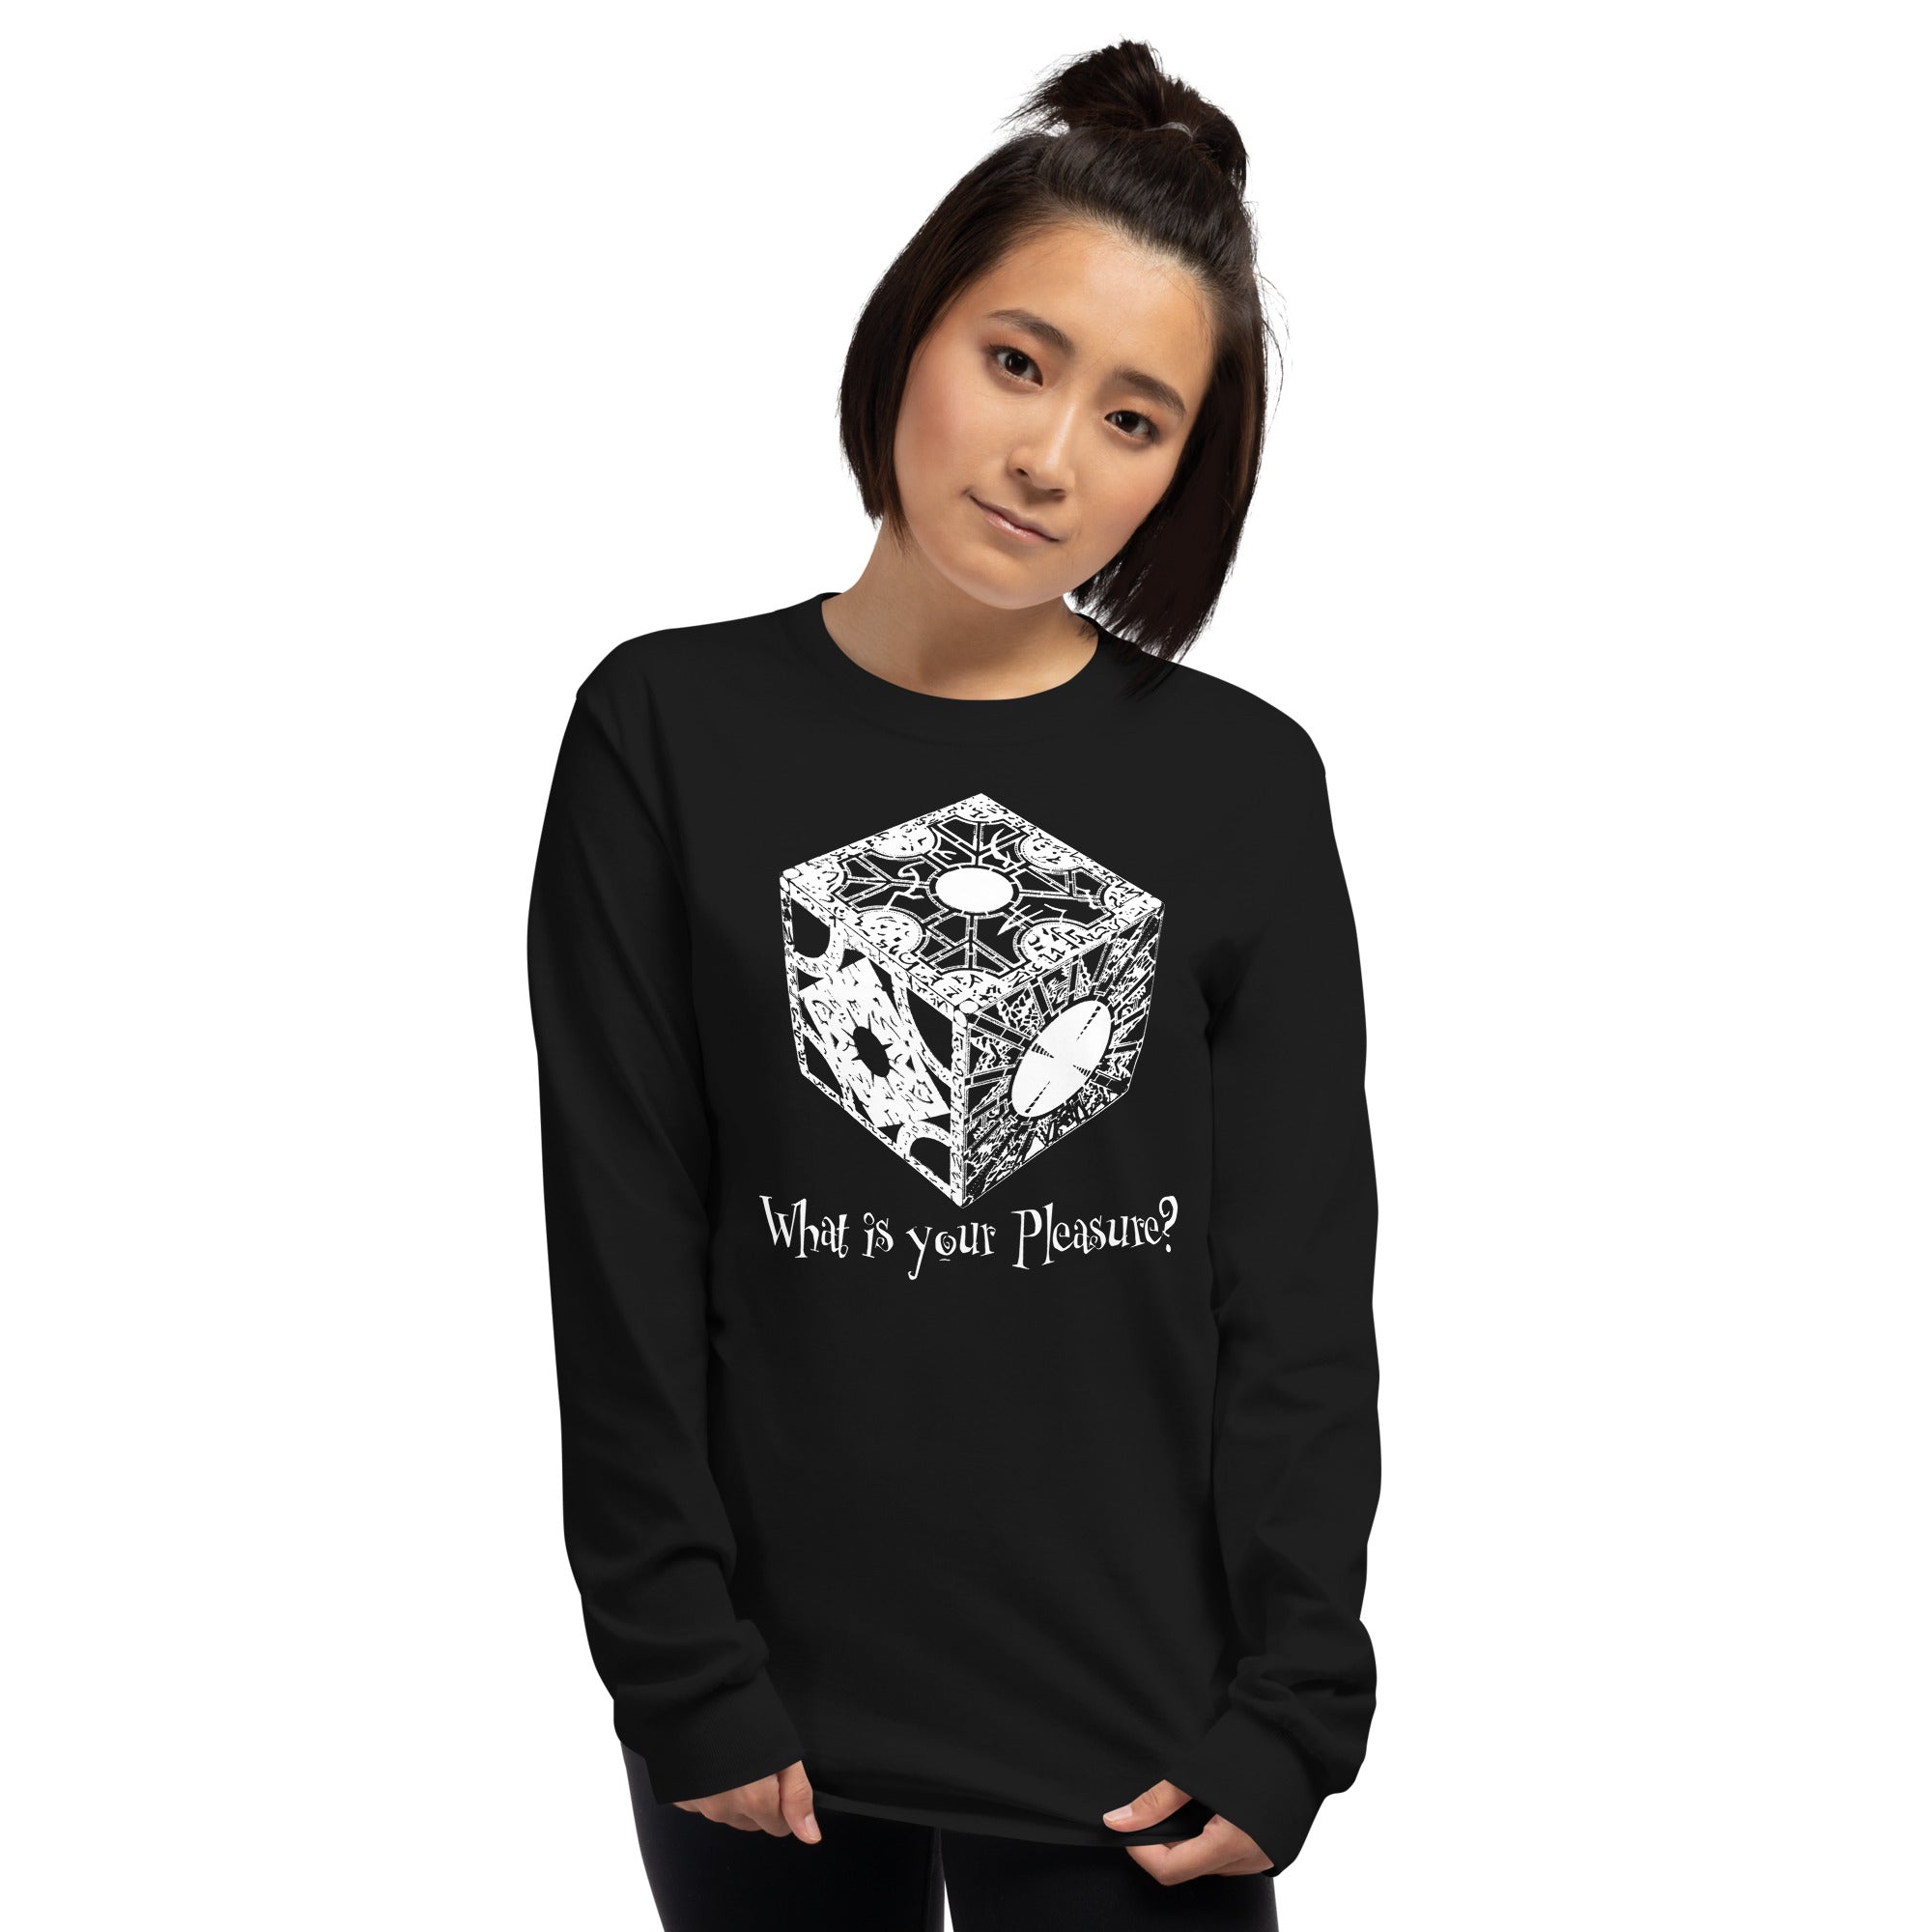 Hellraiser Puzzle Box - What is your Pleasure? Long Sleeve Shirt - Edge of Life Designs